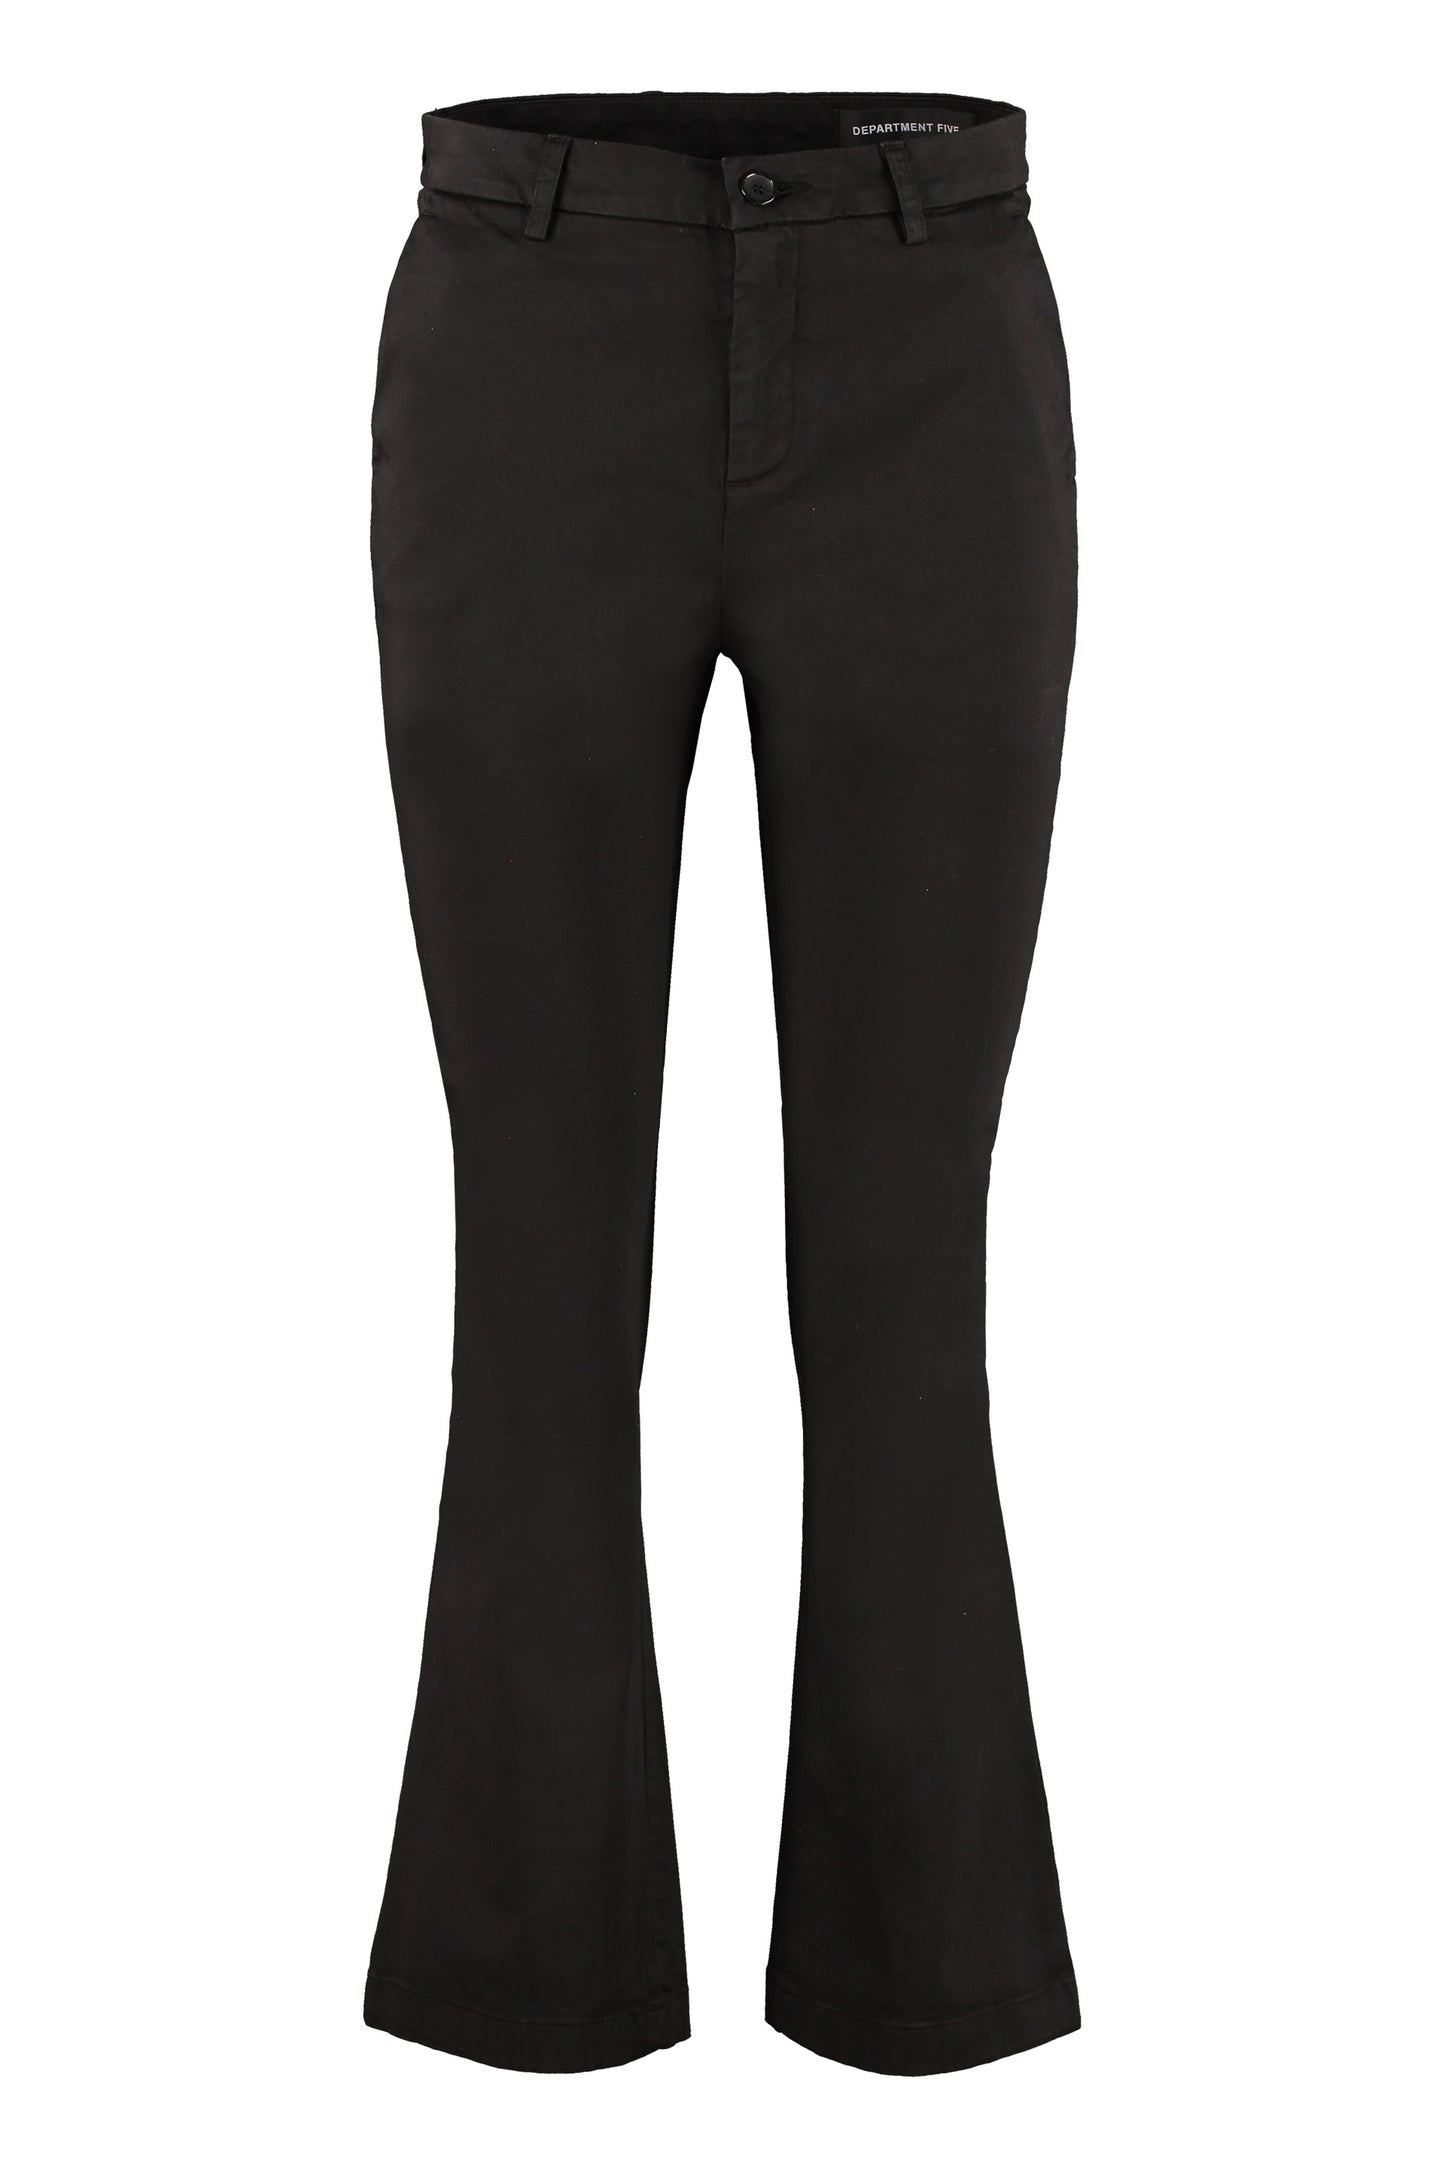 Sax flared ankle-length trousers